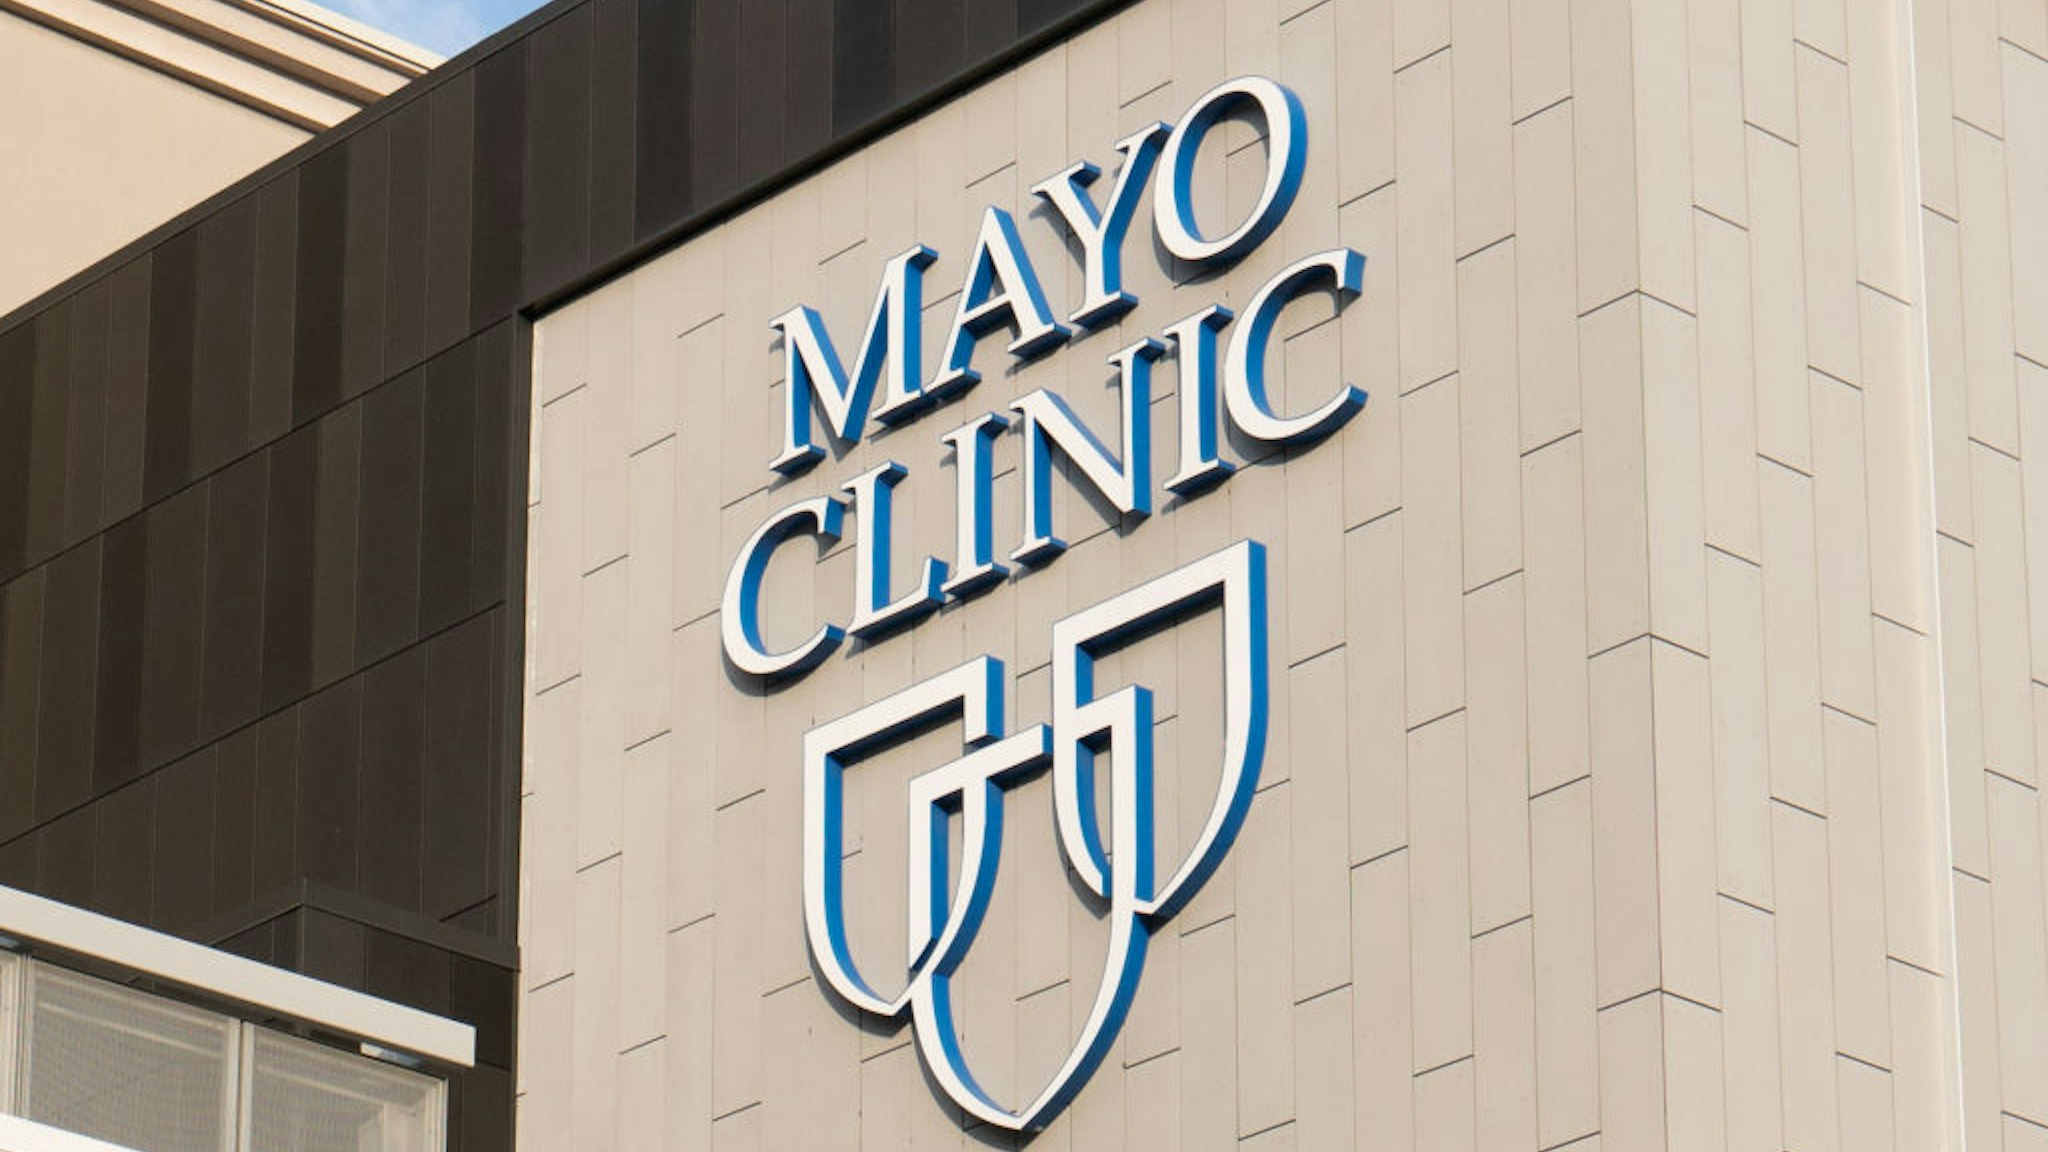 MINNEAPOLIS, MN - SEPTEMBER 05: General views of the Mayo Clinic Sports Medicine building on September 05, 2020 in Minneapolis, Minnesota.